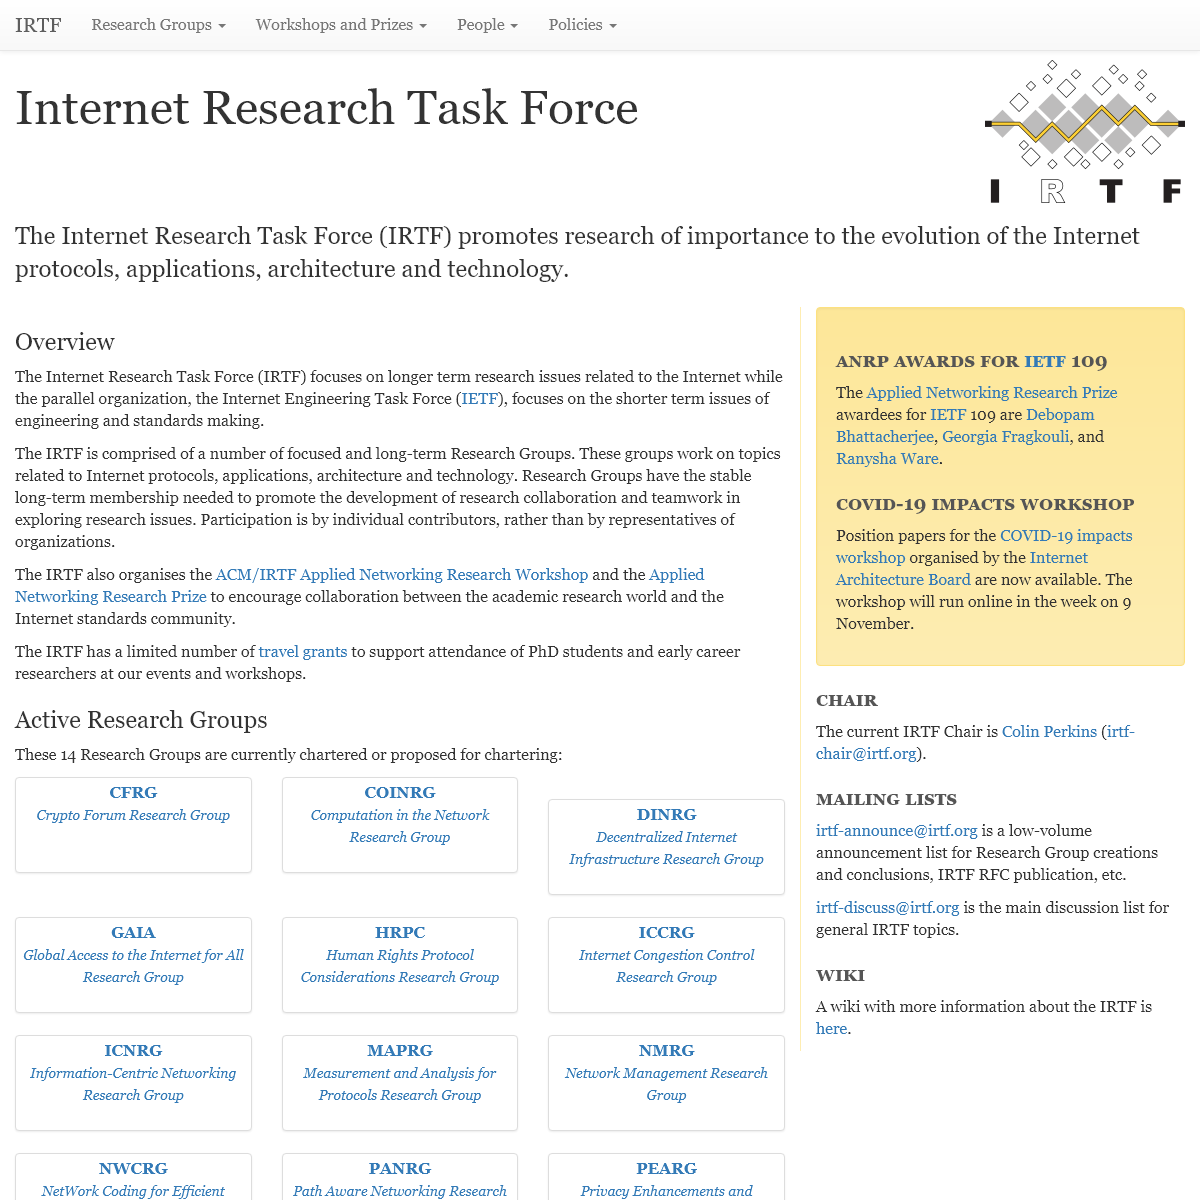 A complete backup of irtf.org